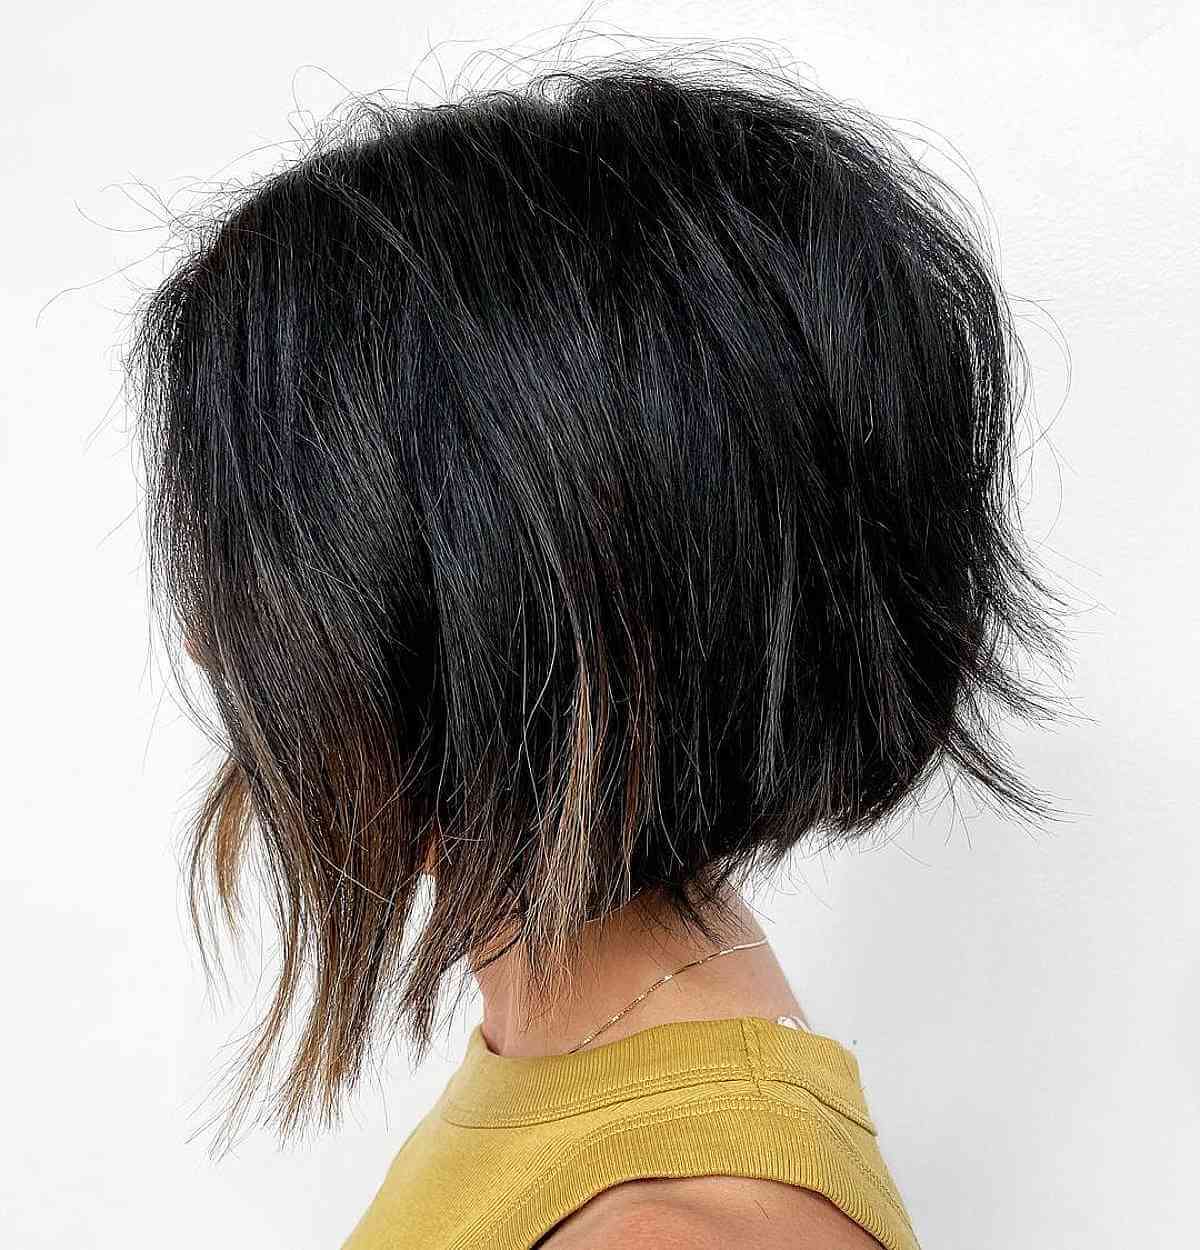 Short Neck-Length Tousled Bob with Jagged Ends